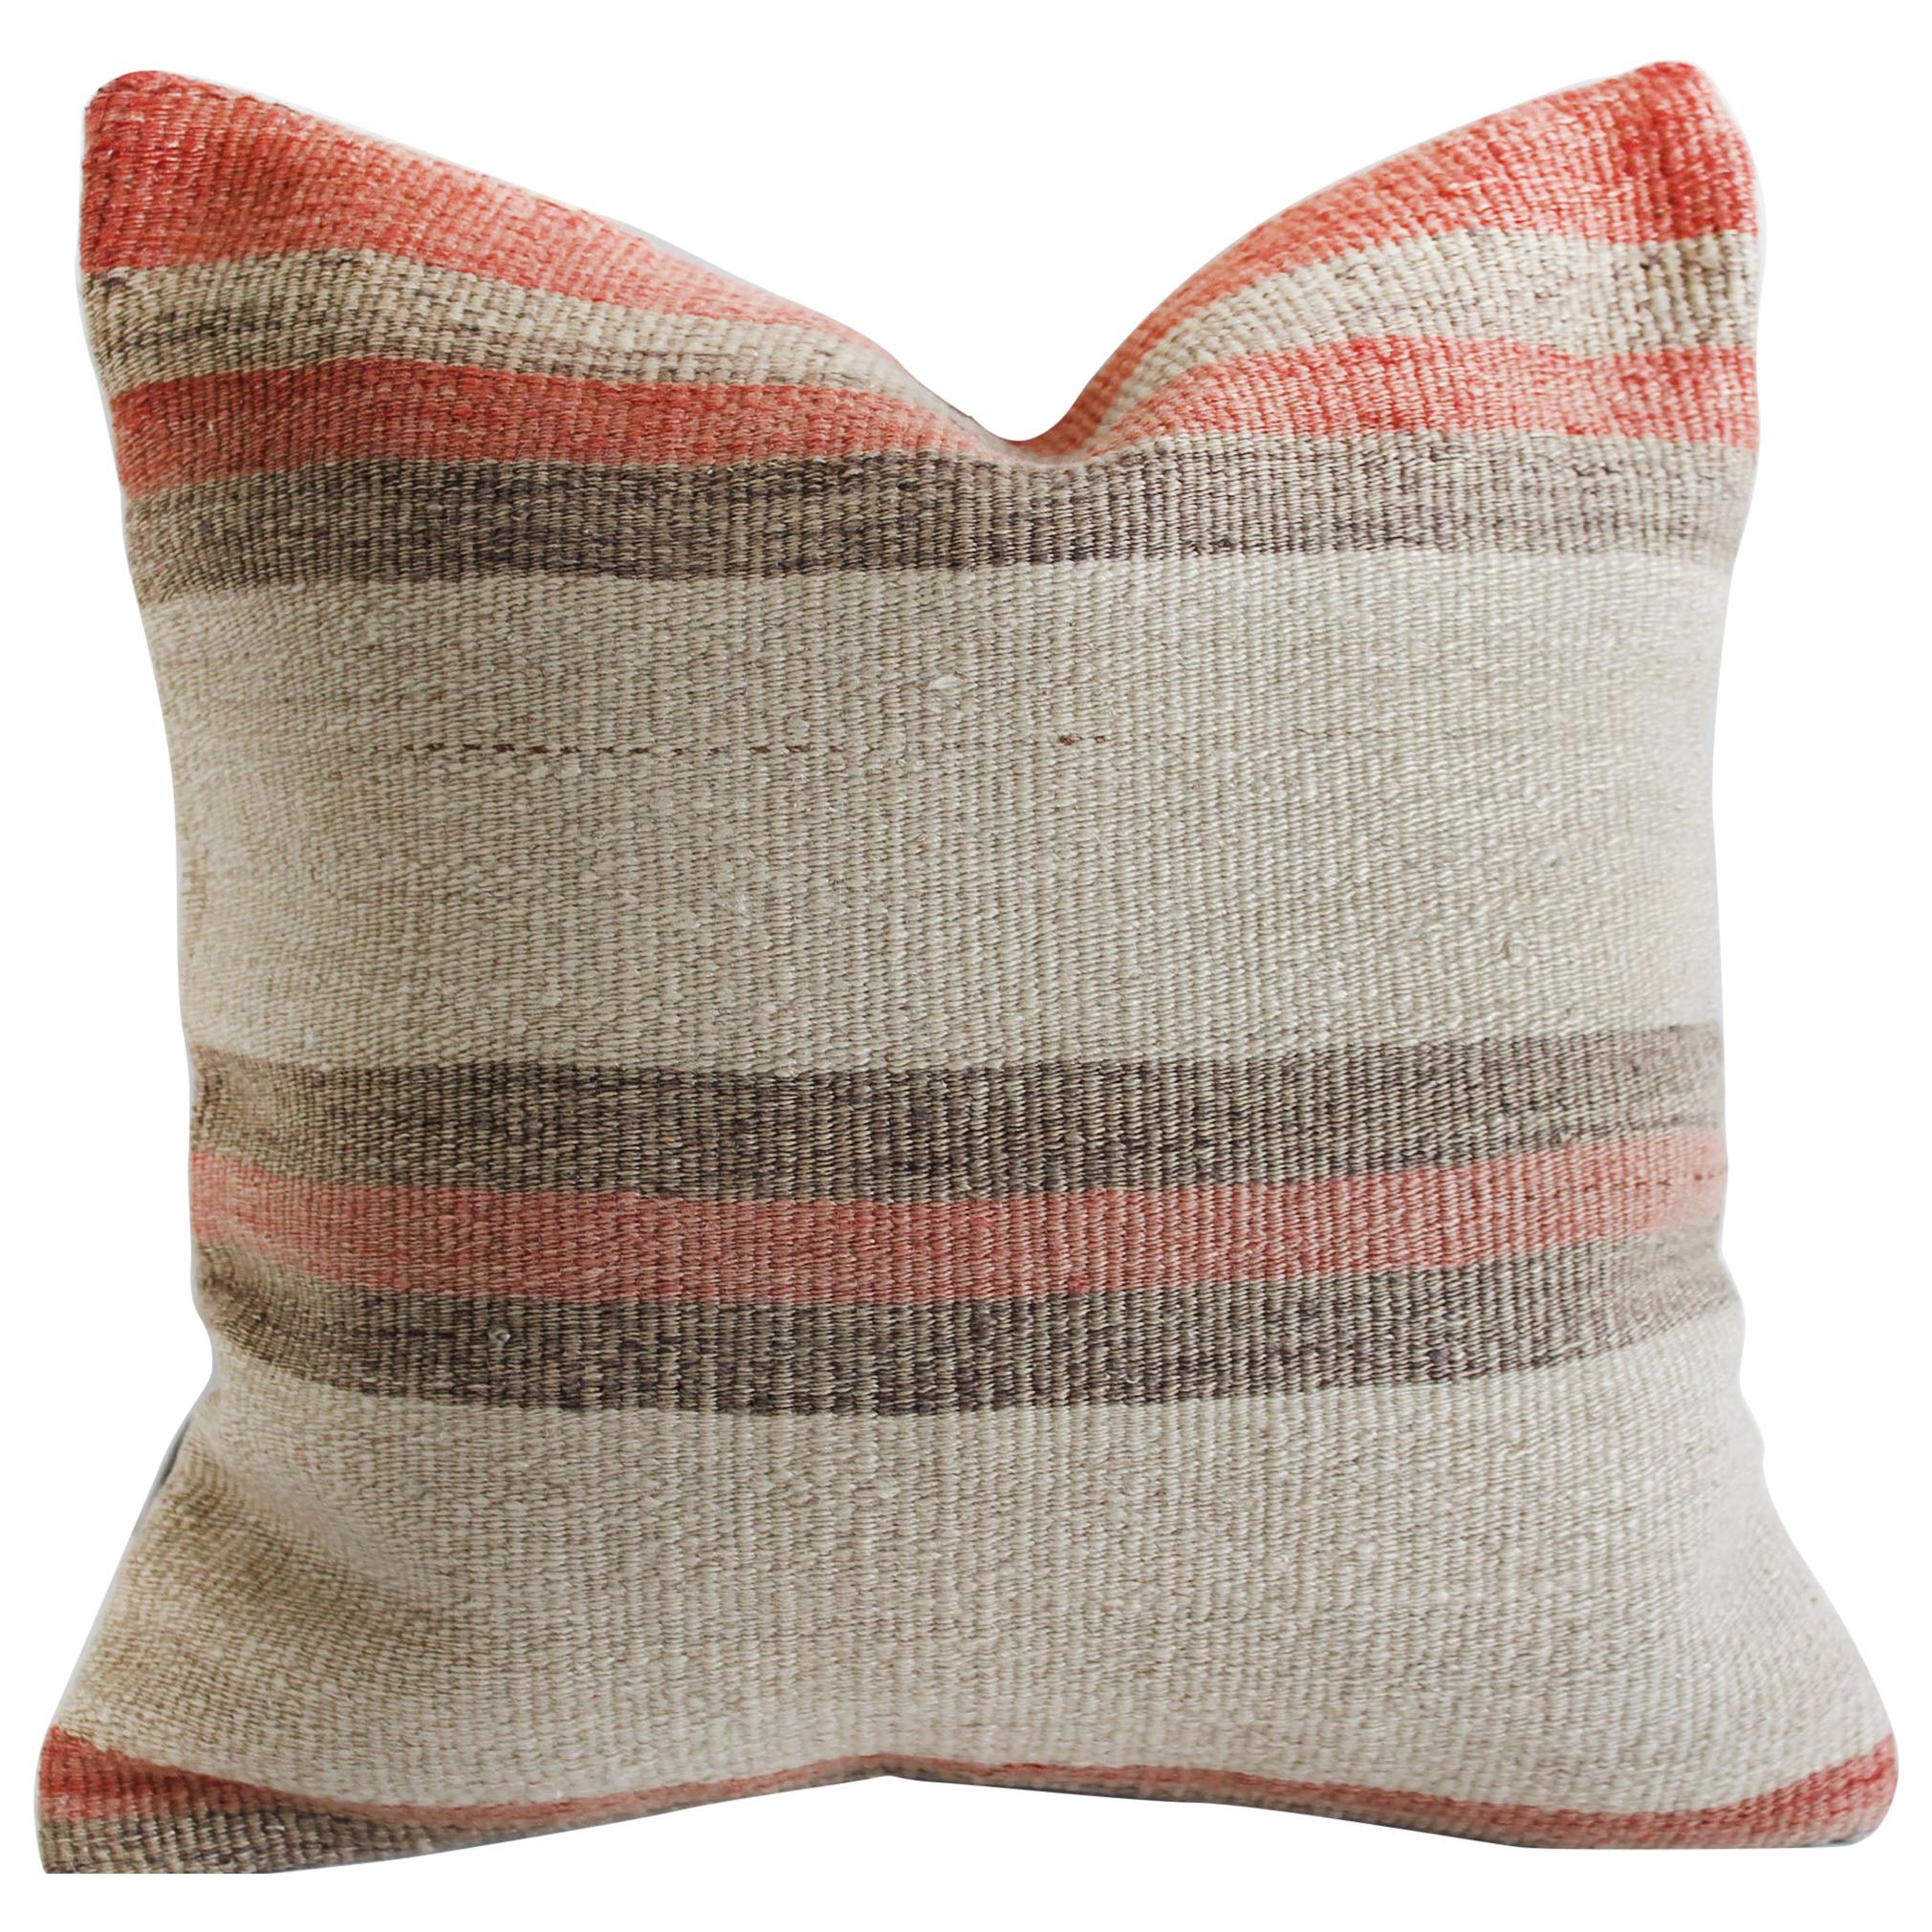 Small Accent Pillow with Multicolored Stripes